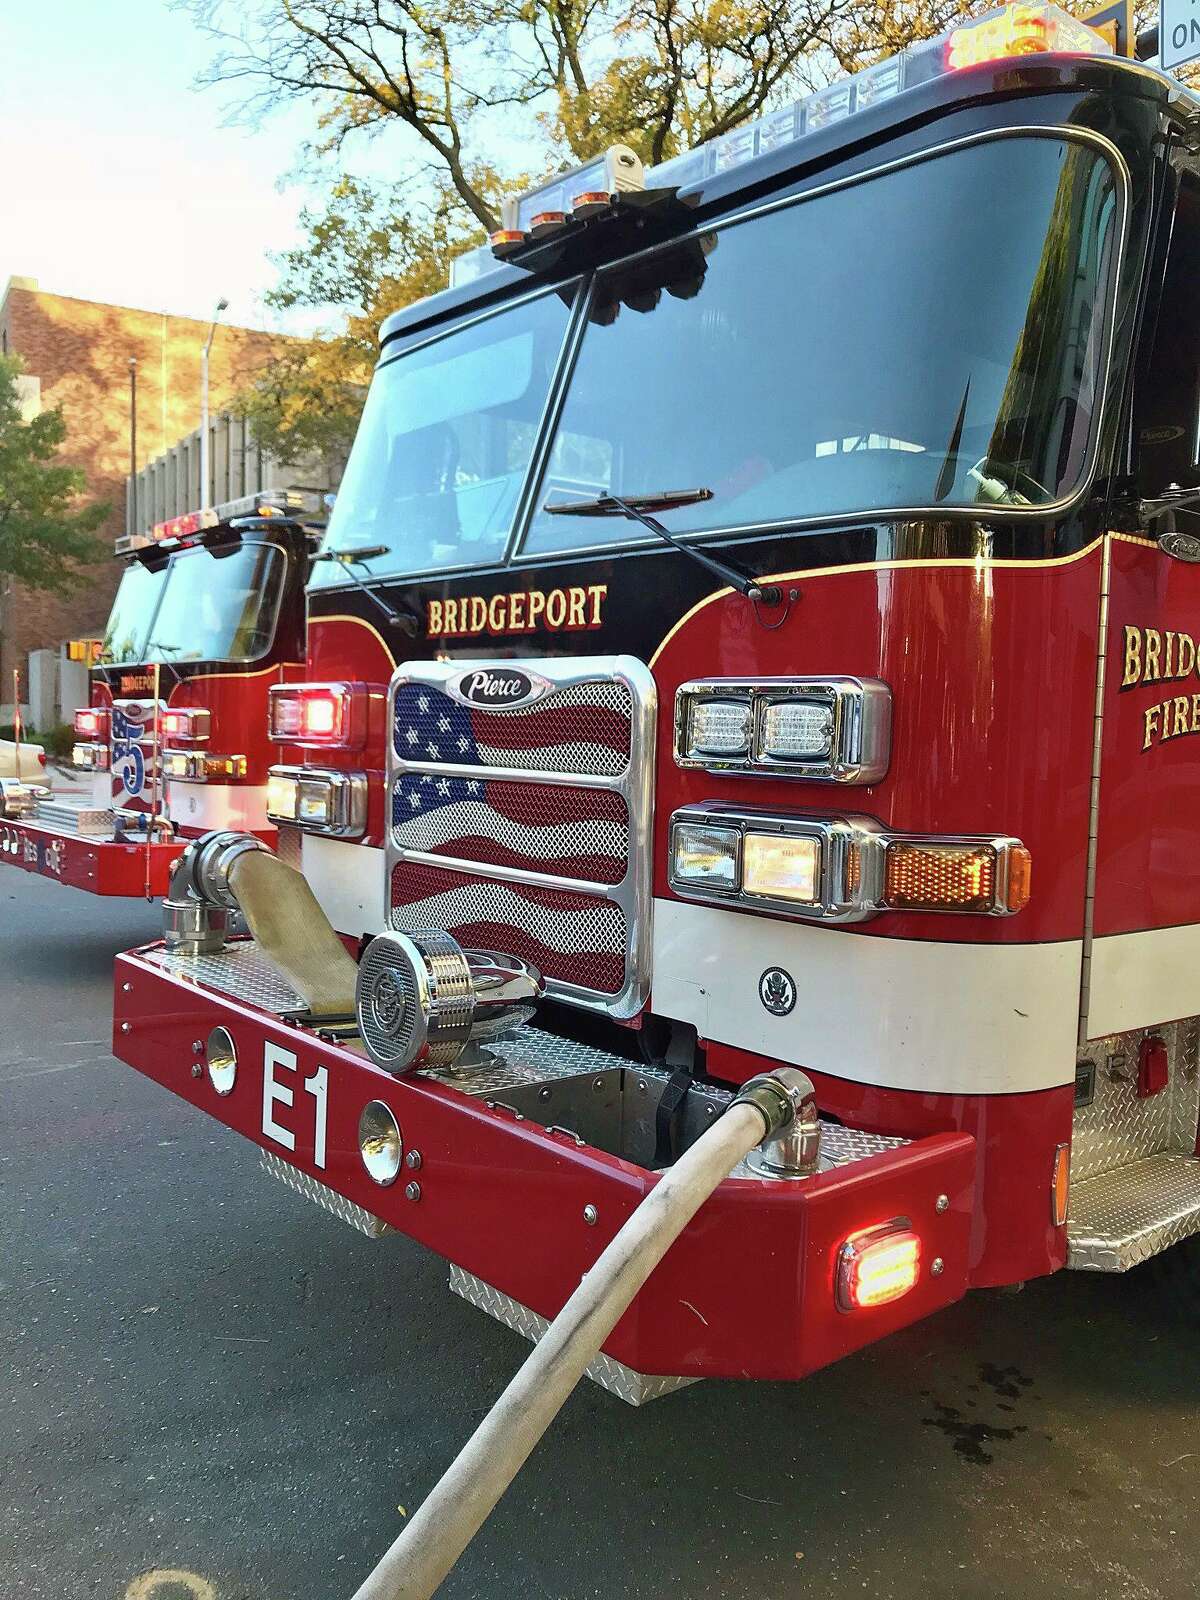 First responders were sent to Fairfield Avenue in Bridgeport, Conn., on Monday, Oct. 4, 2021, around 12:30 p.m. for a reported electrocution, according to a city official.